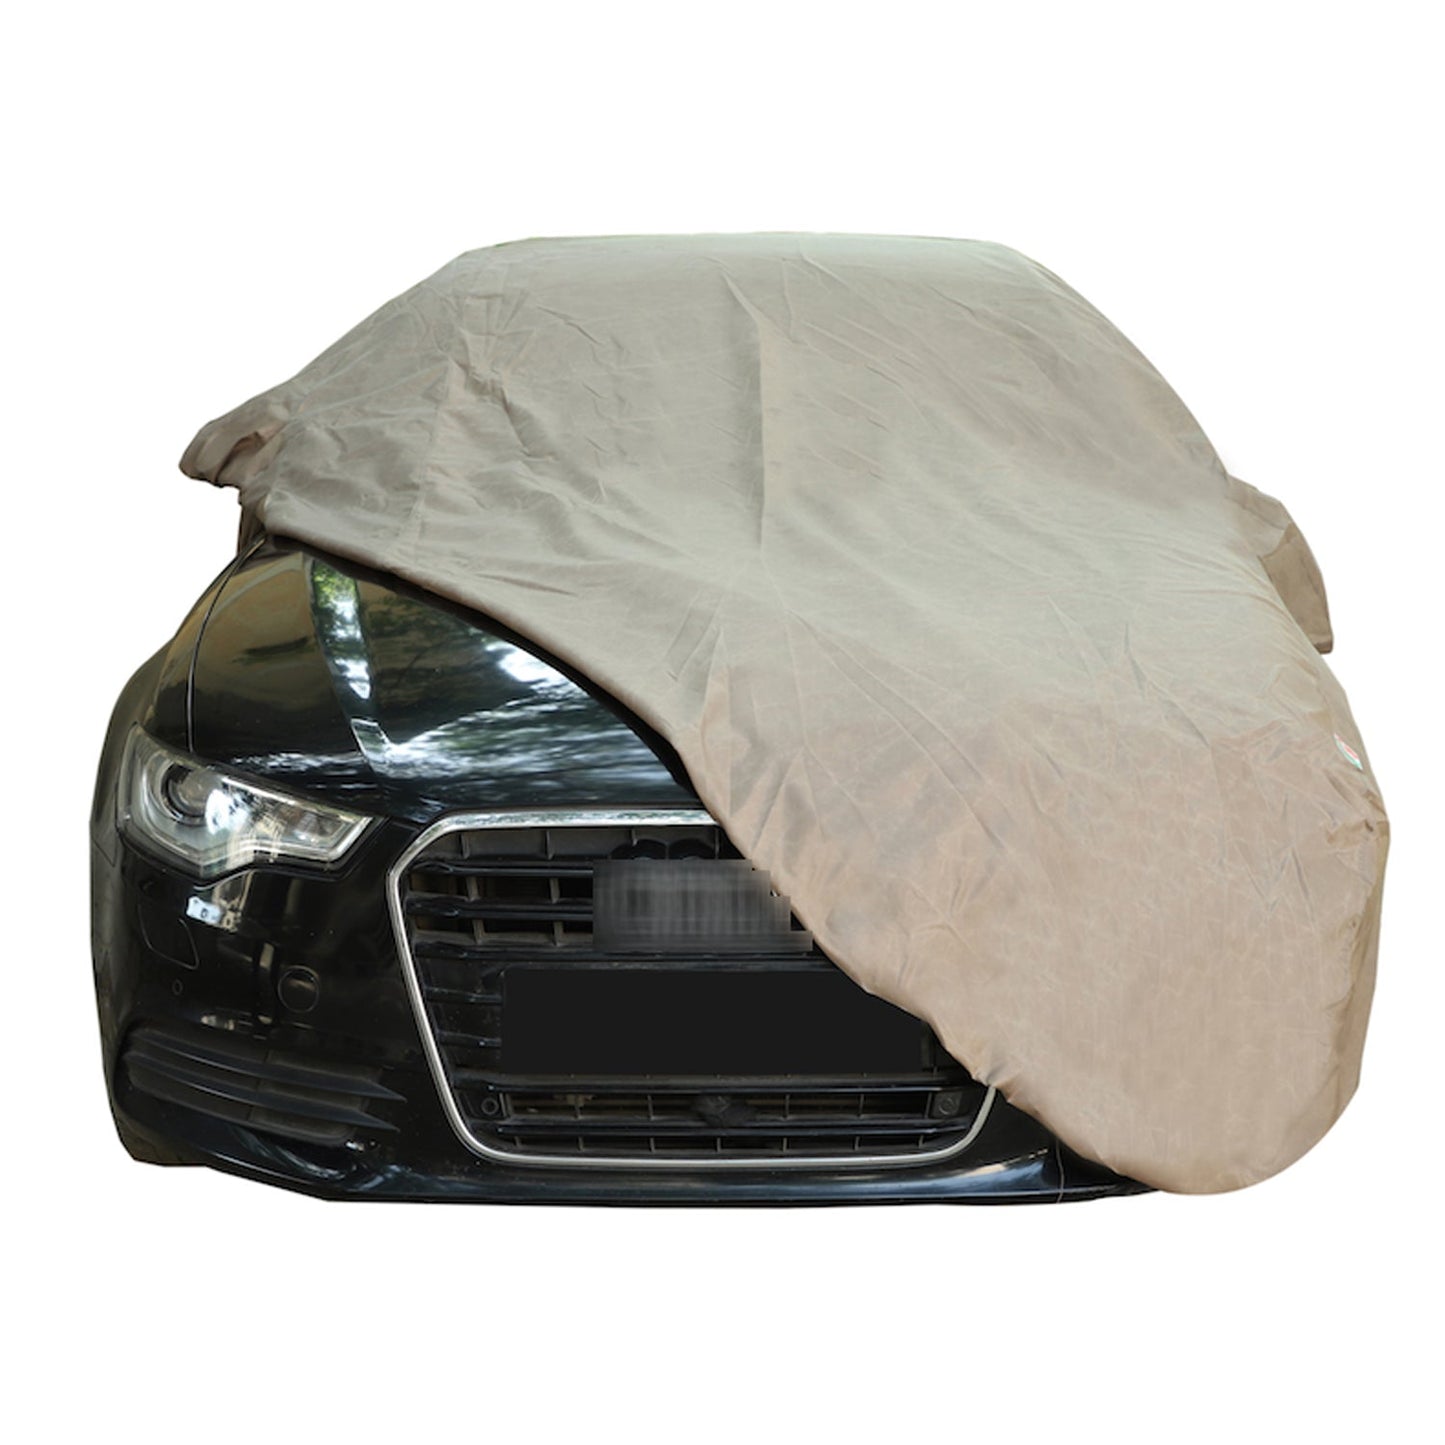 Oshotto Brown 100% Waterproof Car Body Cover with Mirror Pockets For Honda Civic